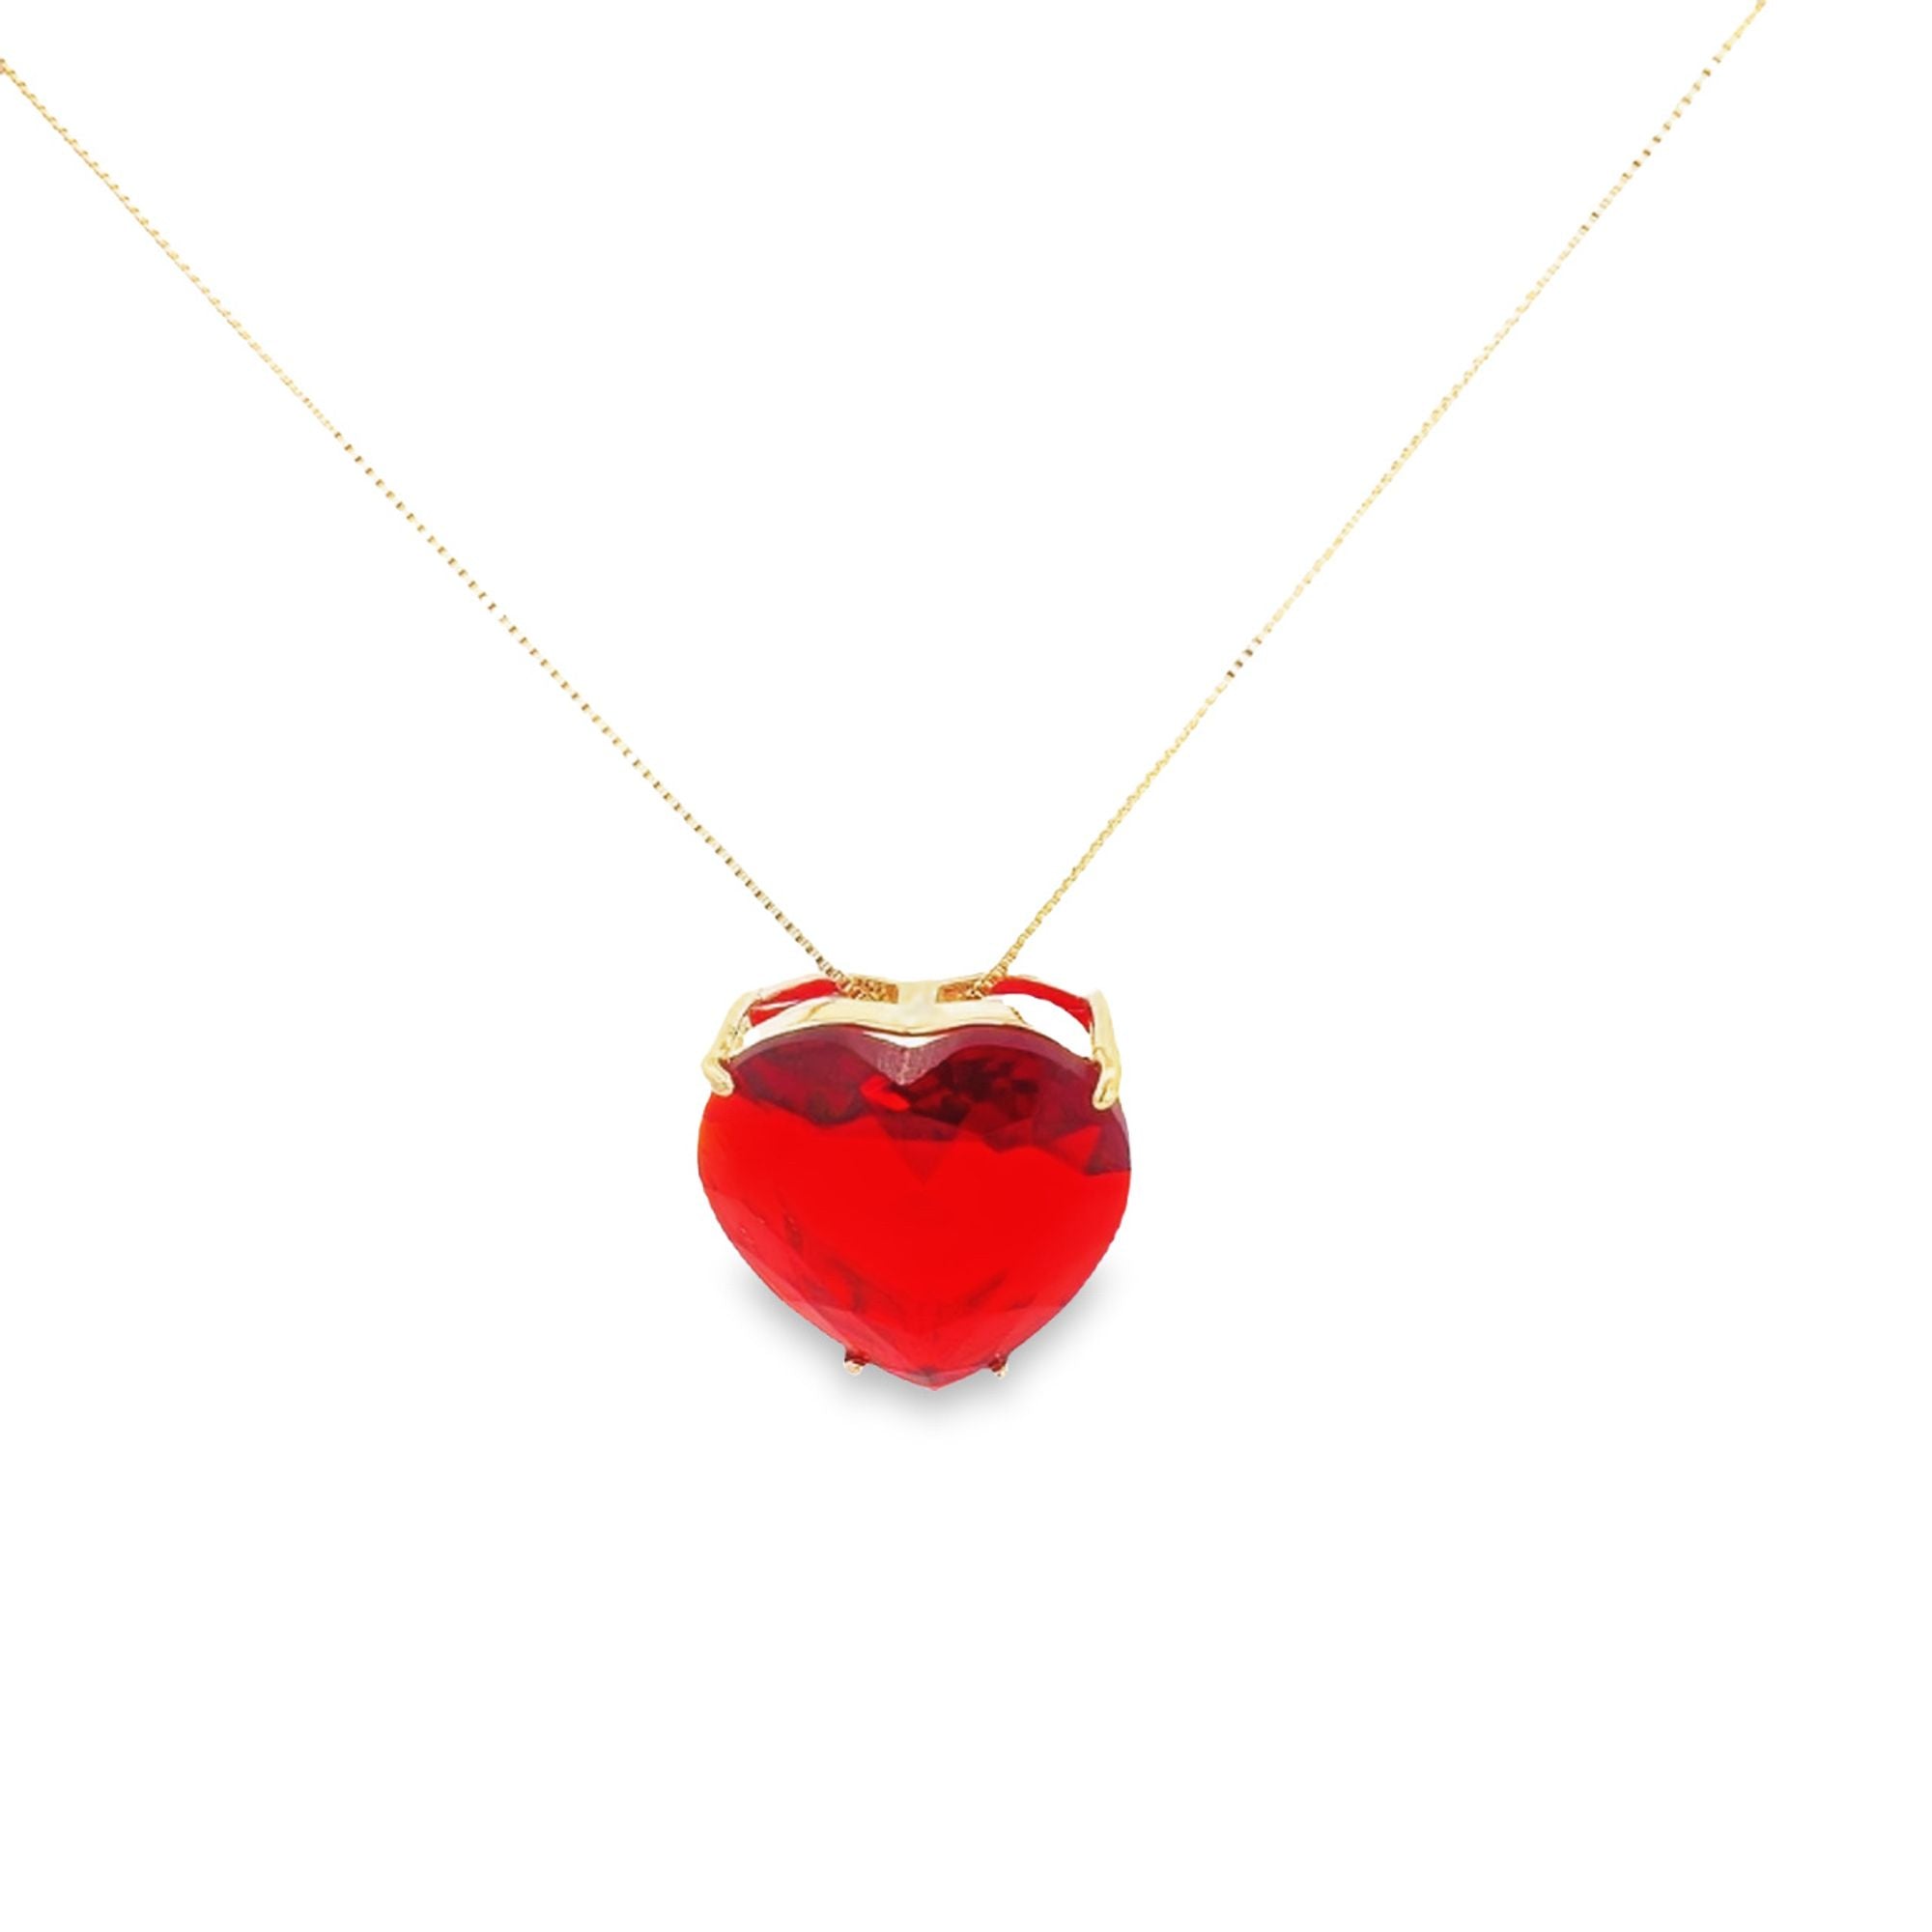 Bulky Natural Stone Gemstone Heart Pendant Box Chain Necklace (H190)